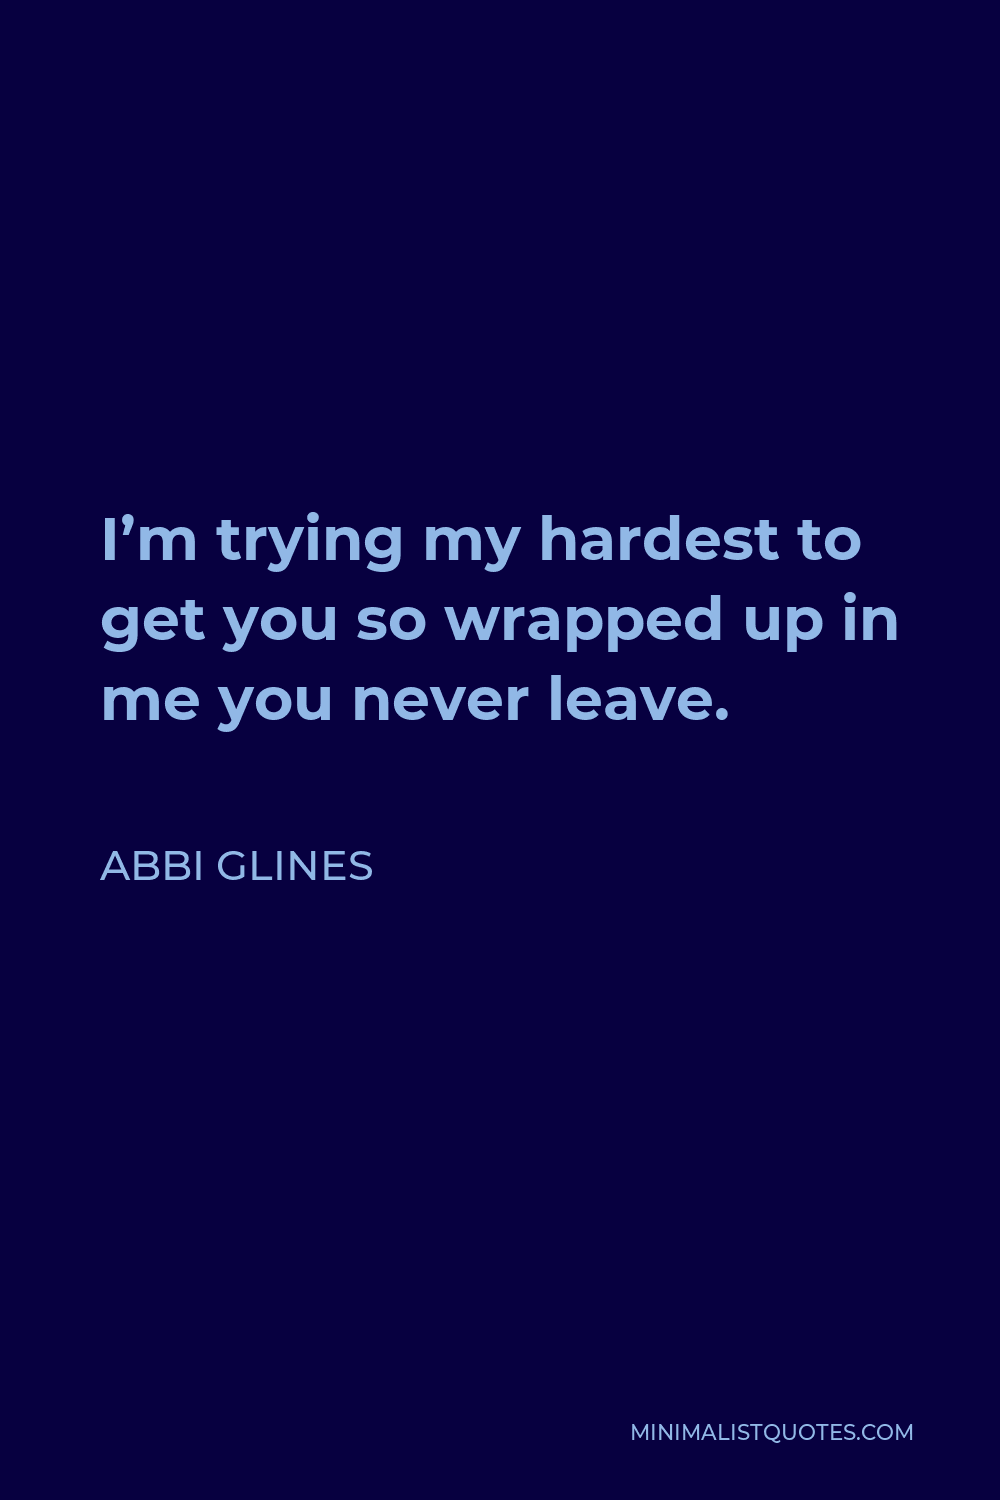 Abbi Glines Quote - I’m trying my hardest to get you so wrapped up in me you never leave.